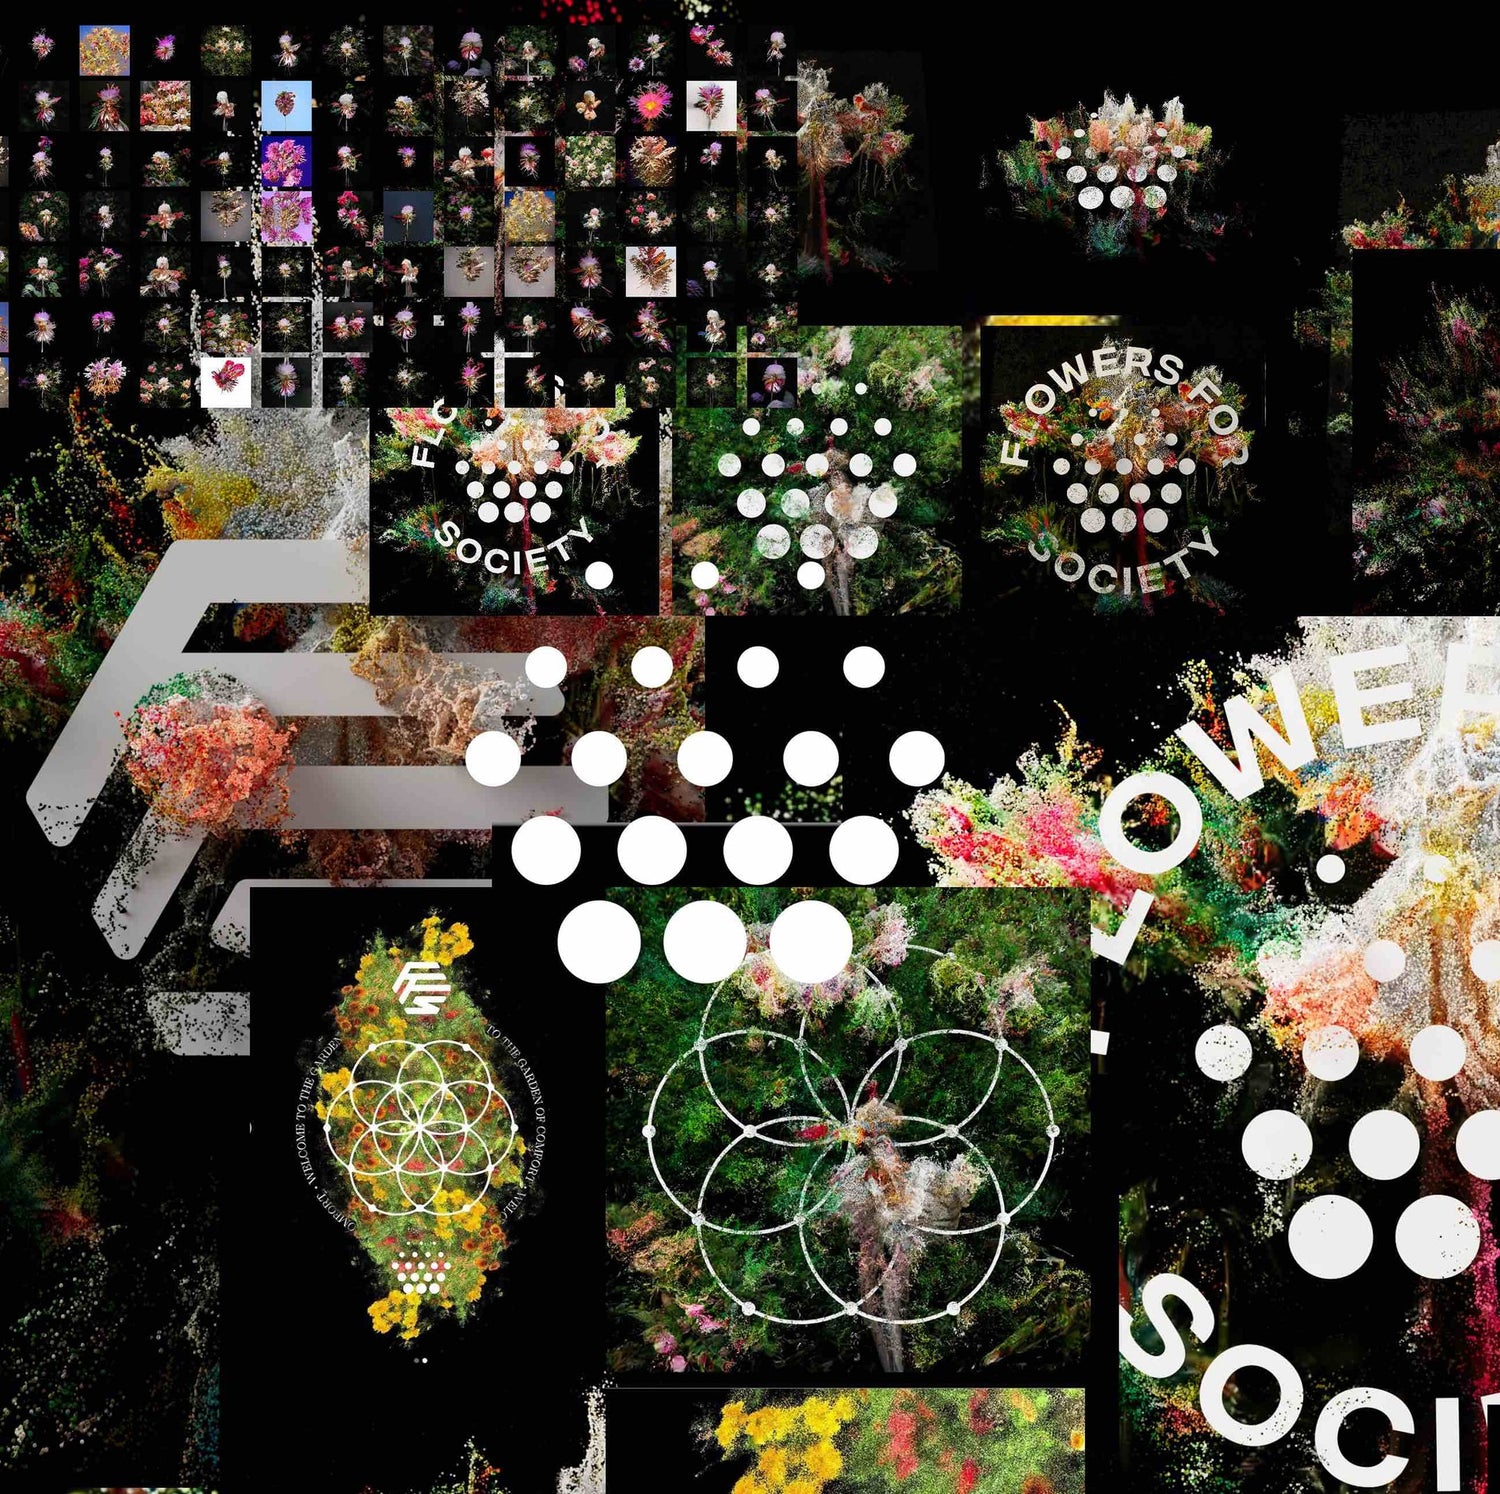 A broad collection of Flowers For Society graphics all based on FFS logos and the point cloud